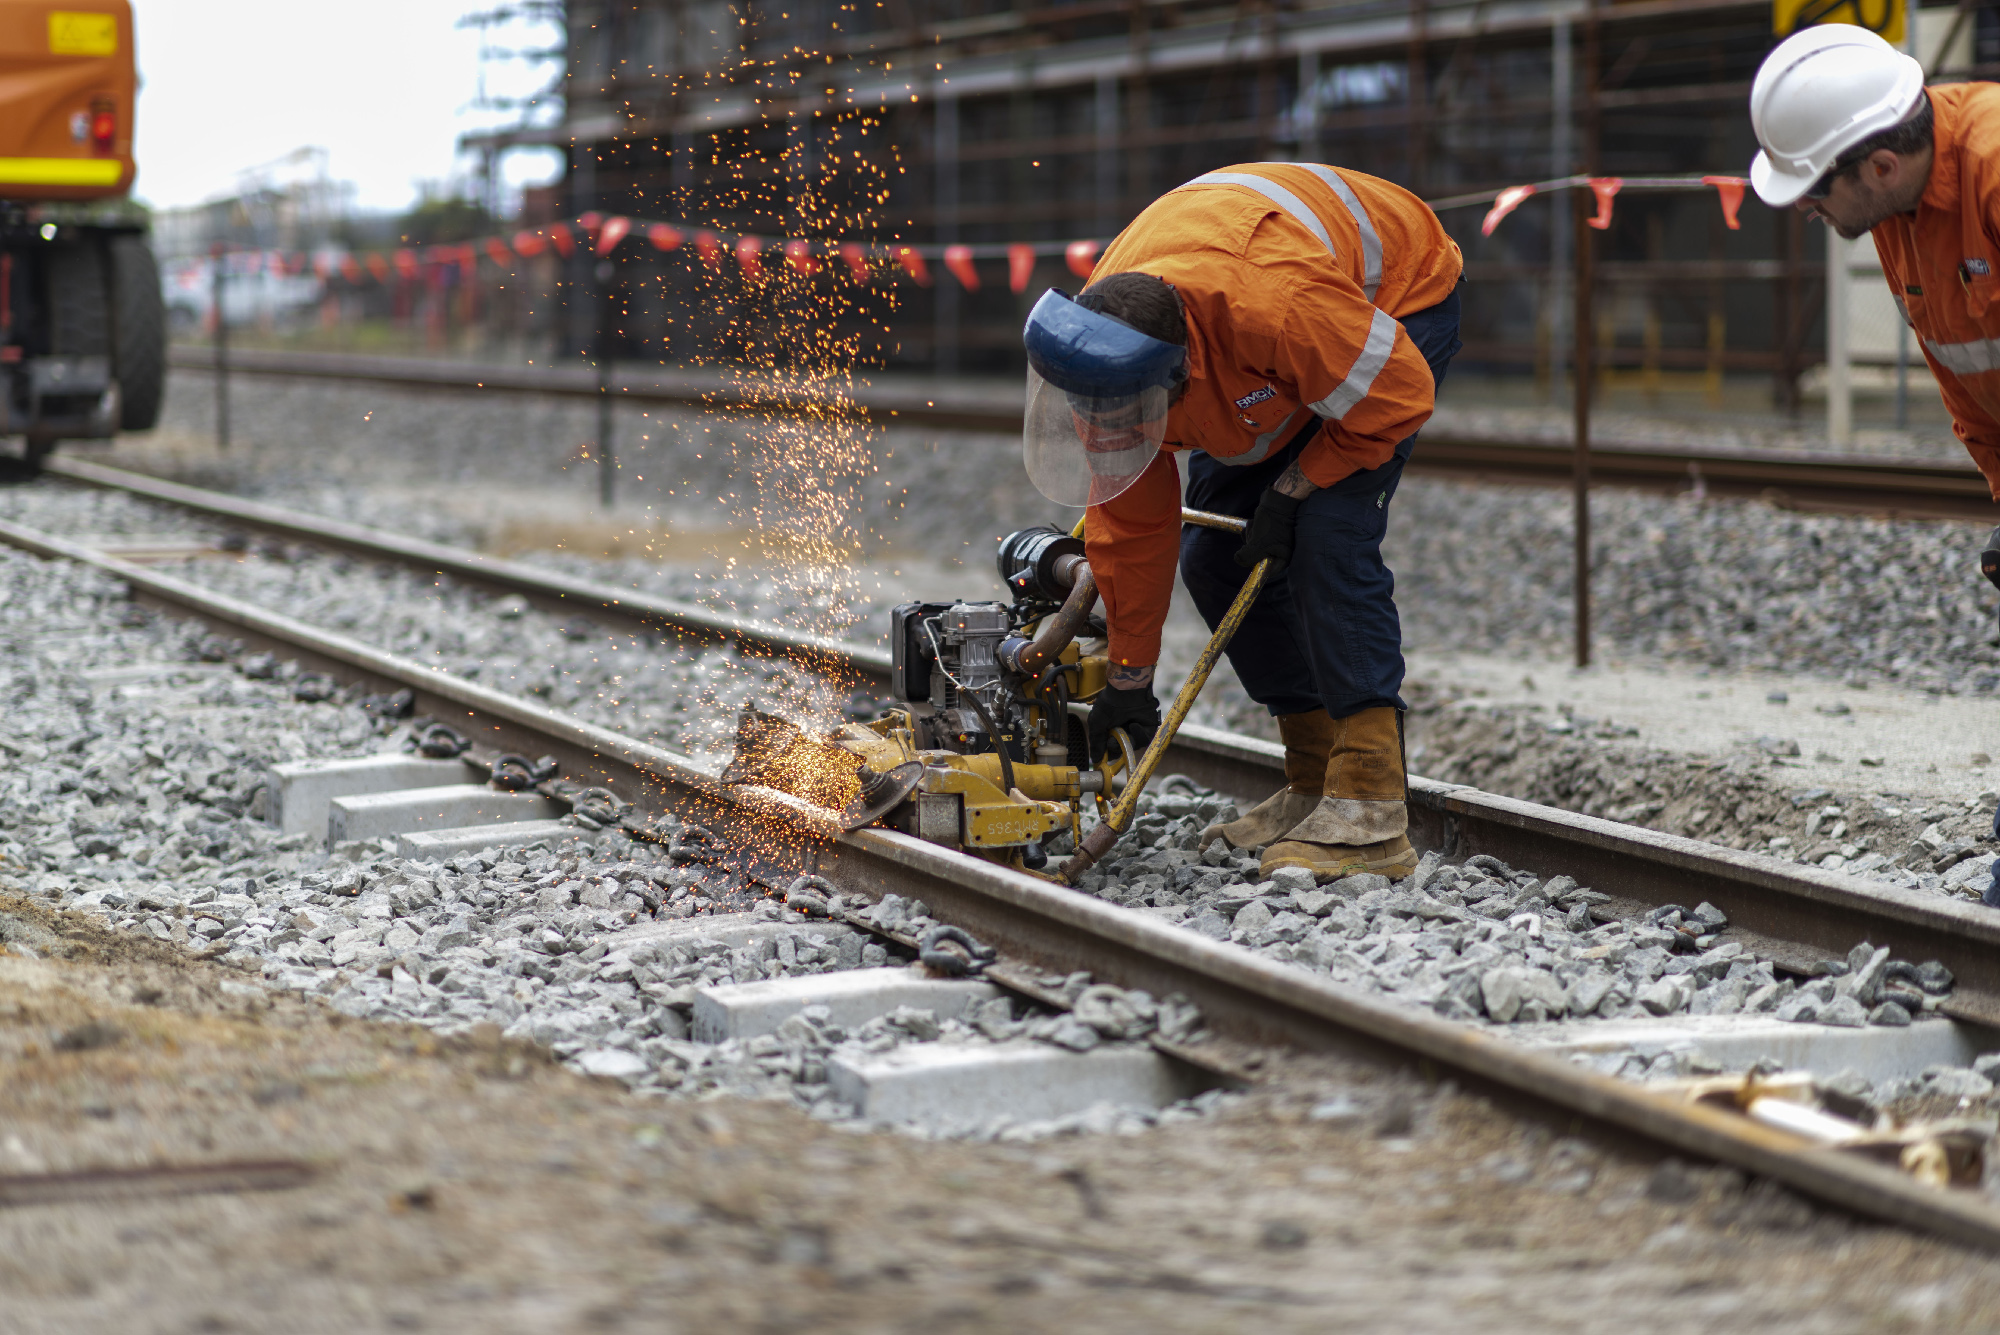 RMC Rail Services is a division of Railtrain that provides a wide range of services nationally in civil, track, signalling and track protection. We have extensive expertise in the delivery of complex and logistically challenging rail projects.